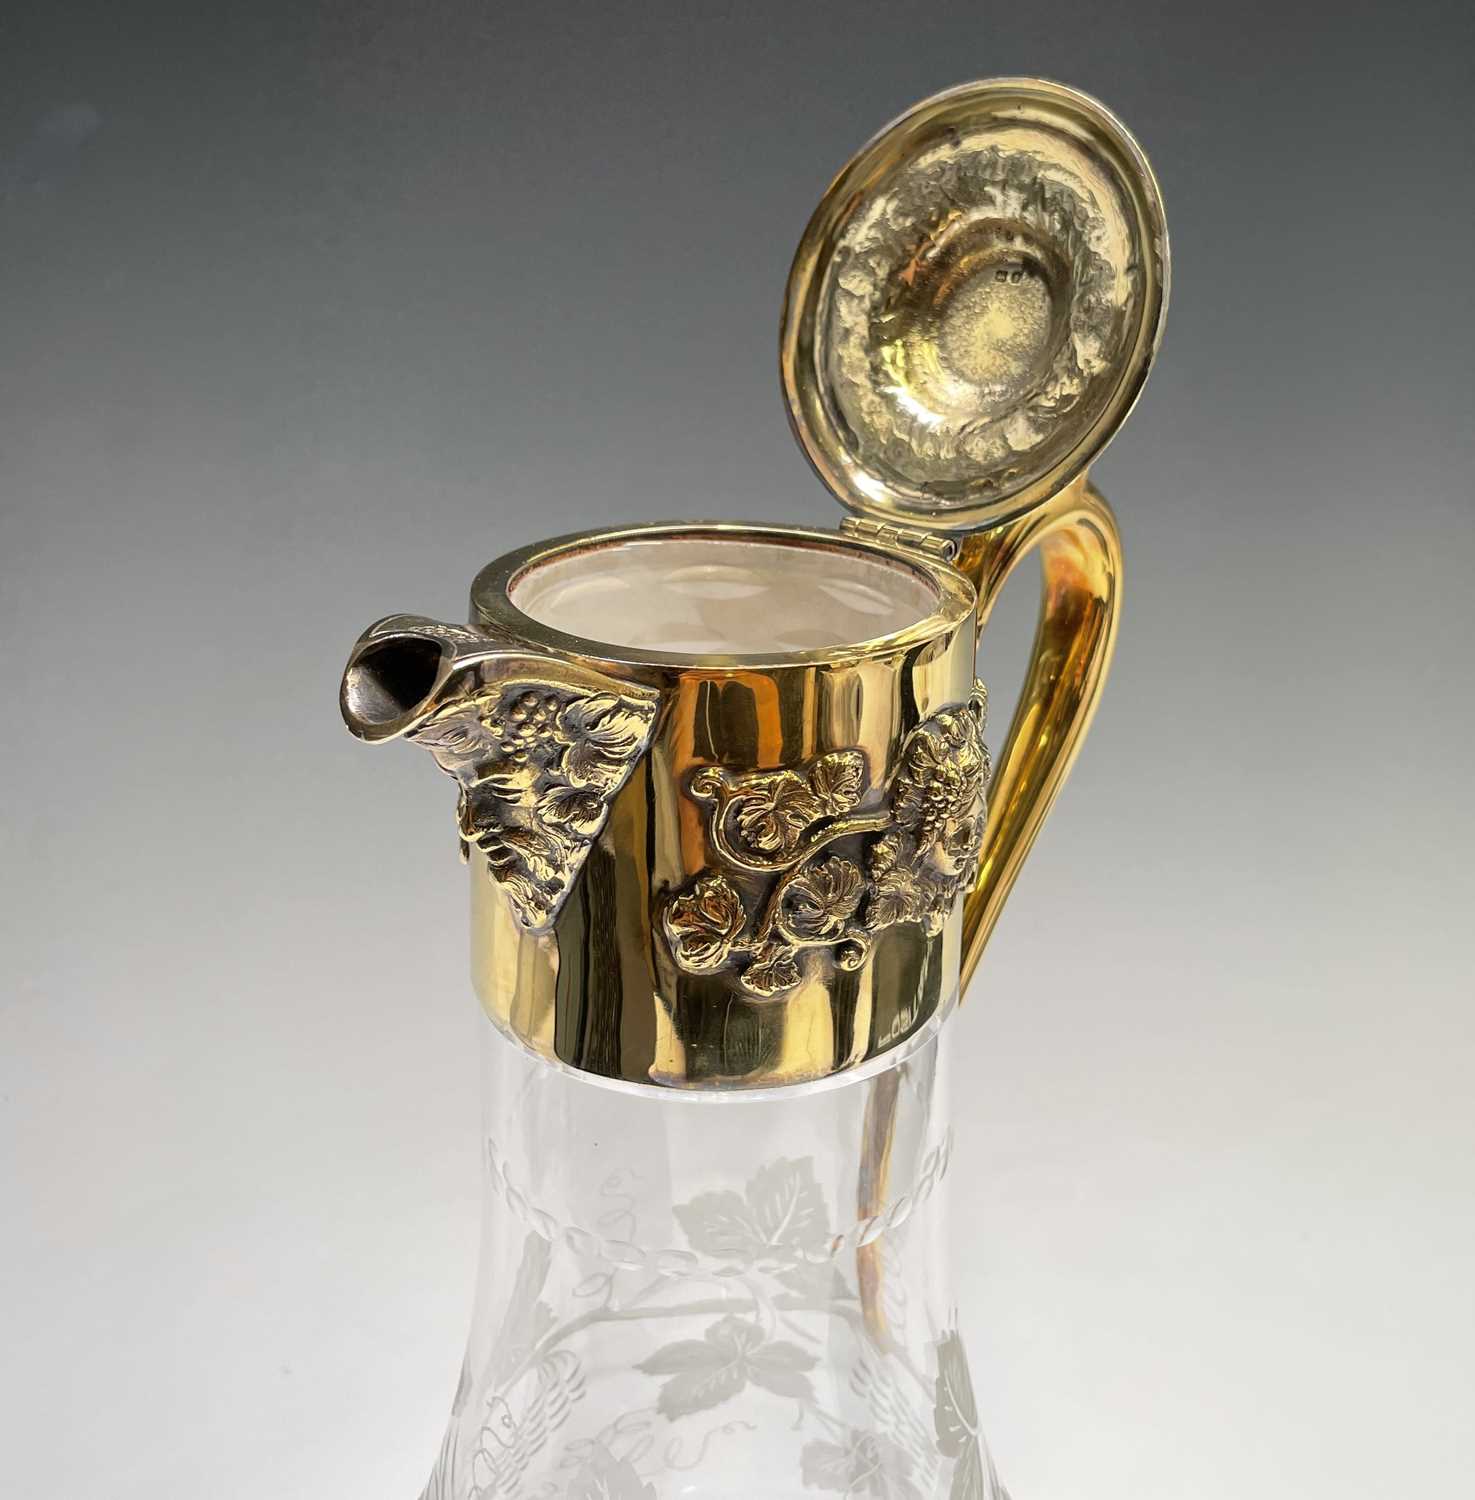 An Asprey claret jug the glass body cut and engraved with vines the silver-gilt mount with - Image 12 of 16